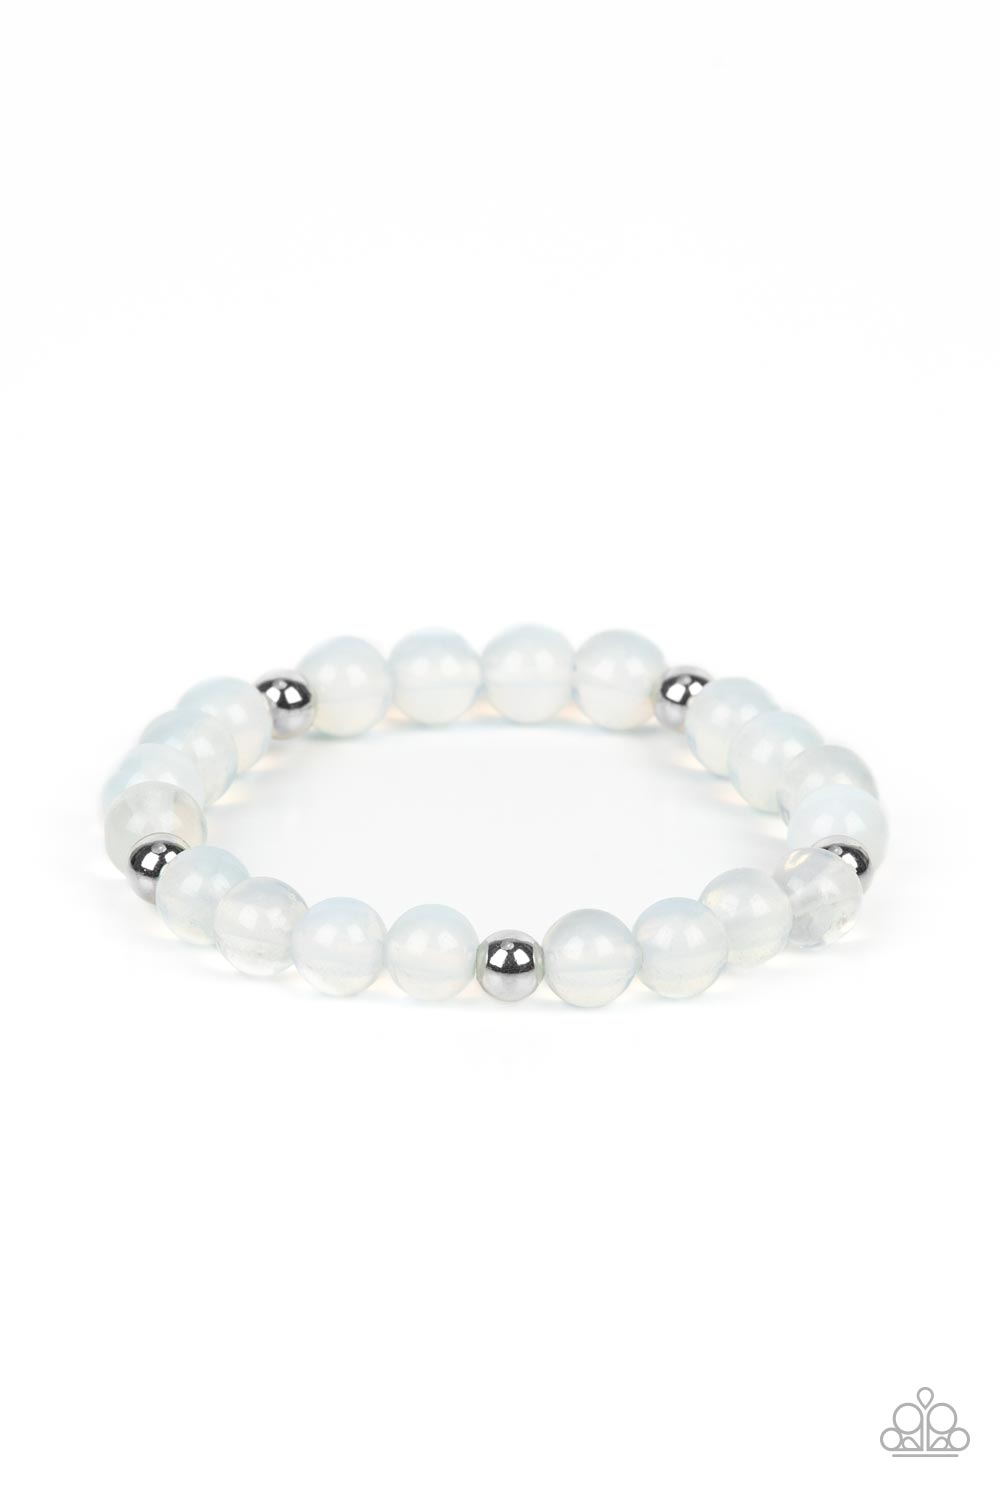 Forever and a DAYDREAM - White Glassy Bead - Stretchy Bracelet - Paparazzi Accessories - A dreamy collection of glassy and opalescent white beads are threaded along a stretchy band around the wrist for an enchanting glow.